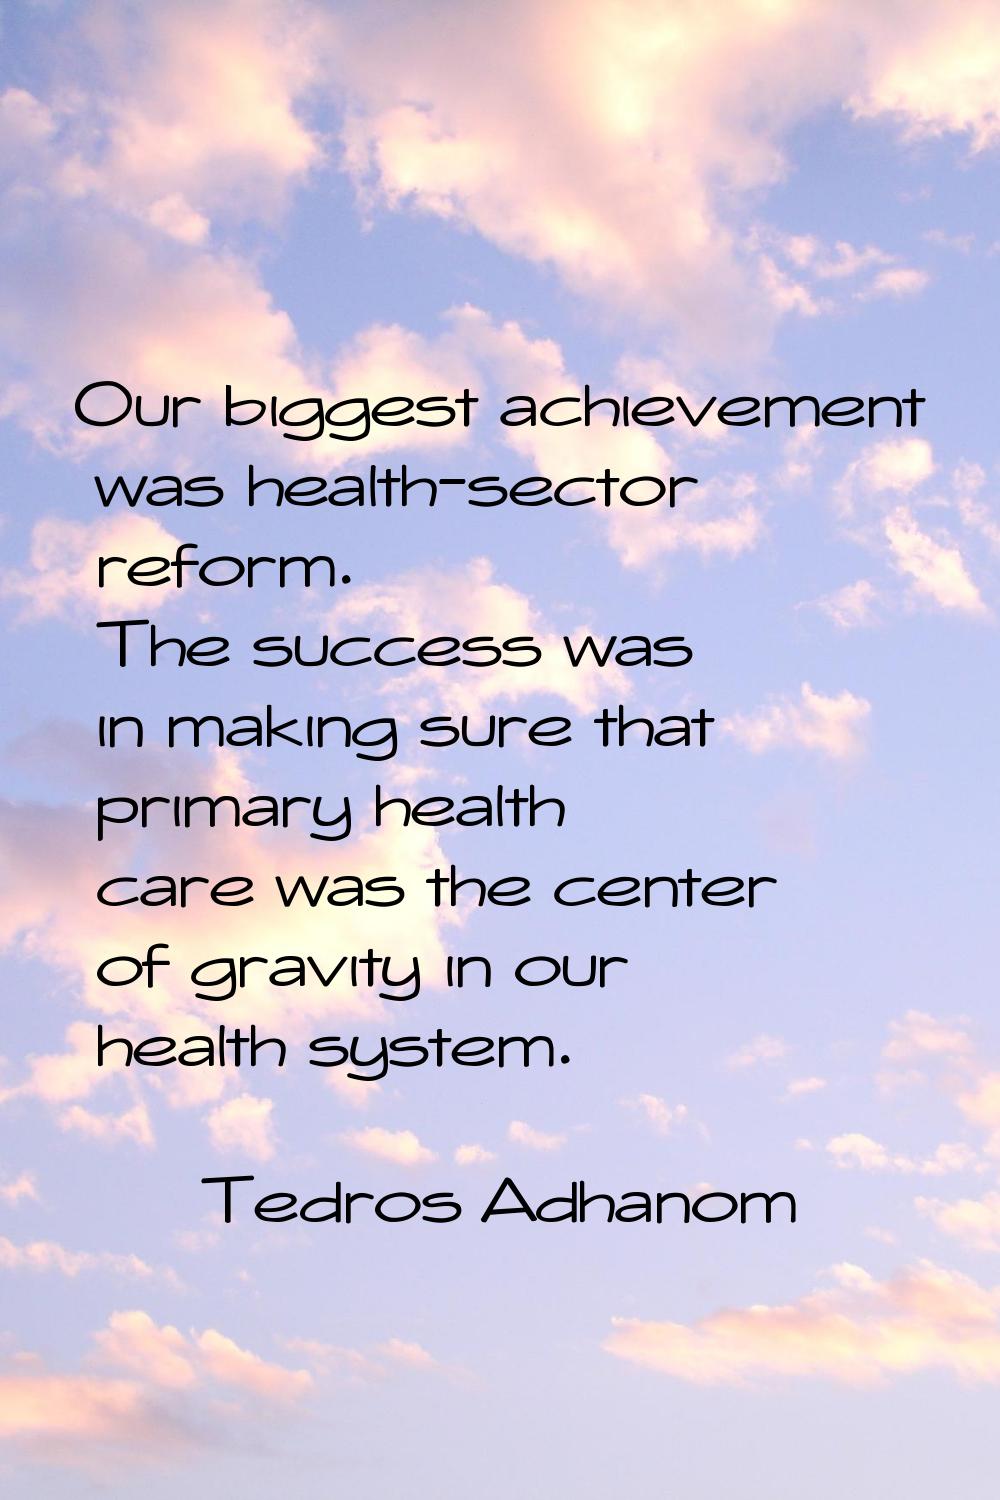 Our biggest achievement was health-sector reform. The success was in making sure that primary healt